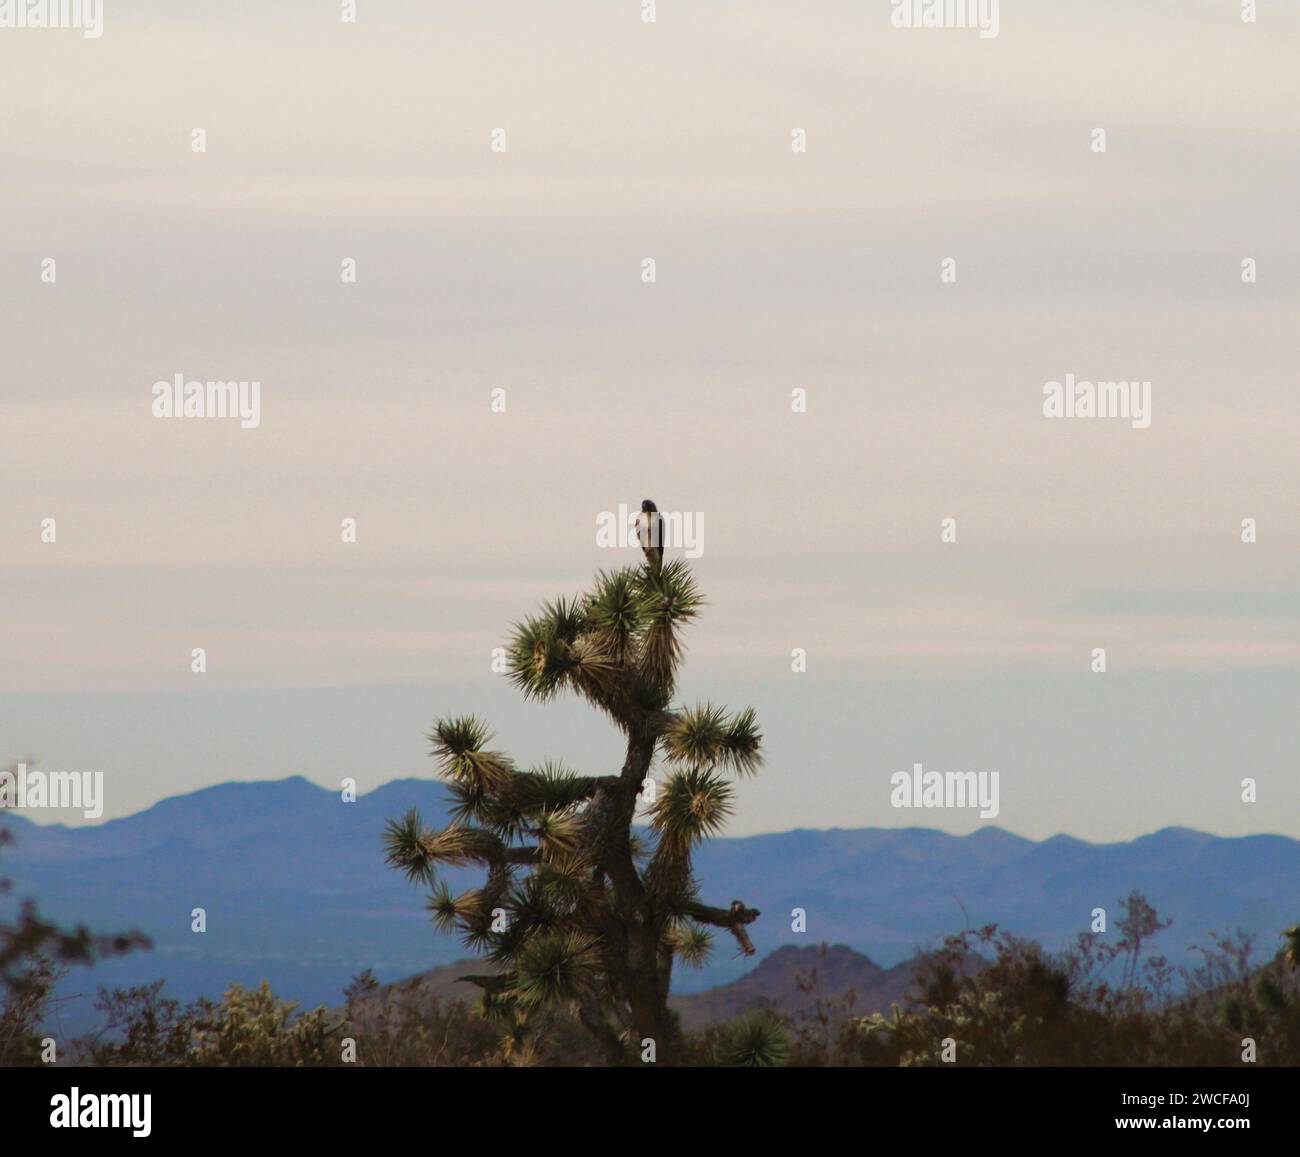 Hawk on a Joshua Tree in Mohave County, Az looking west into Calif. Background - Arizona and California mountians. Stock Photo